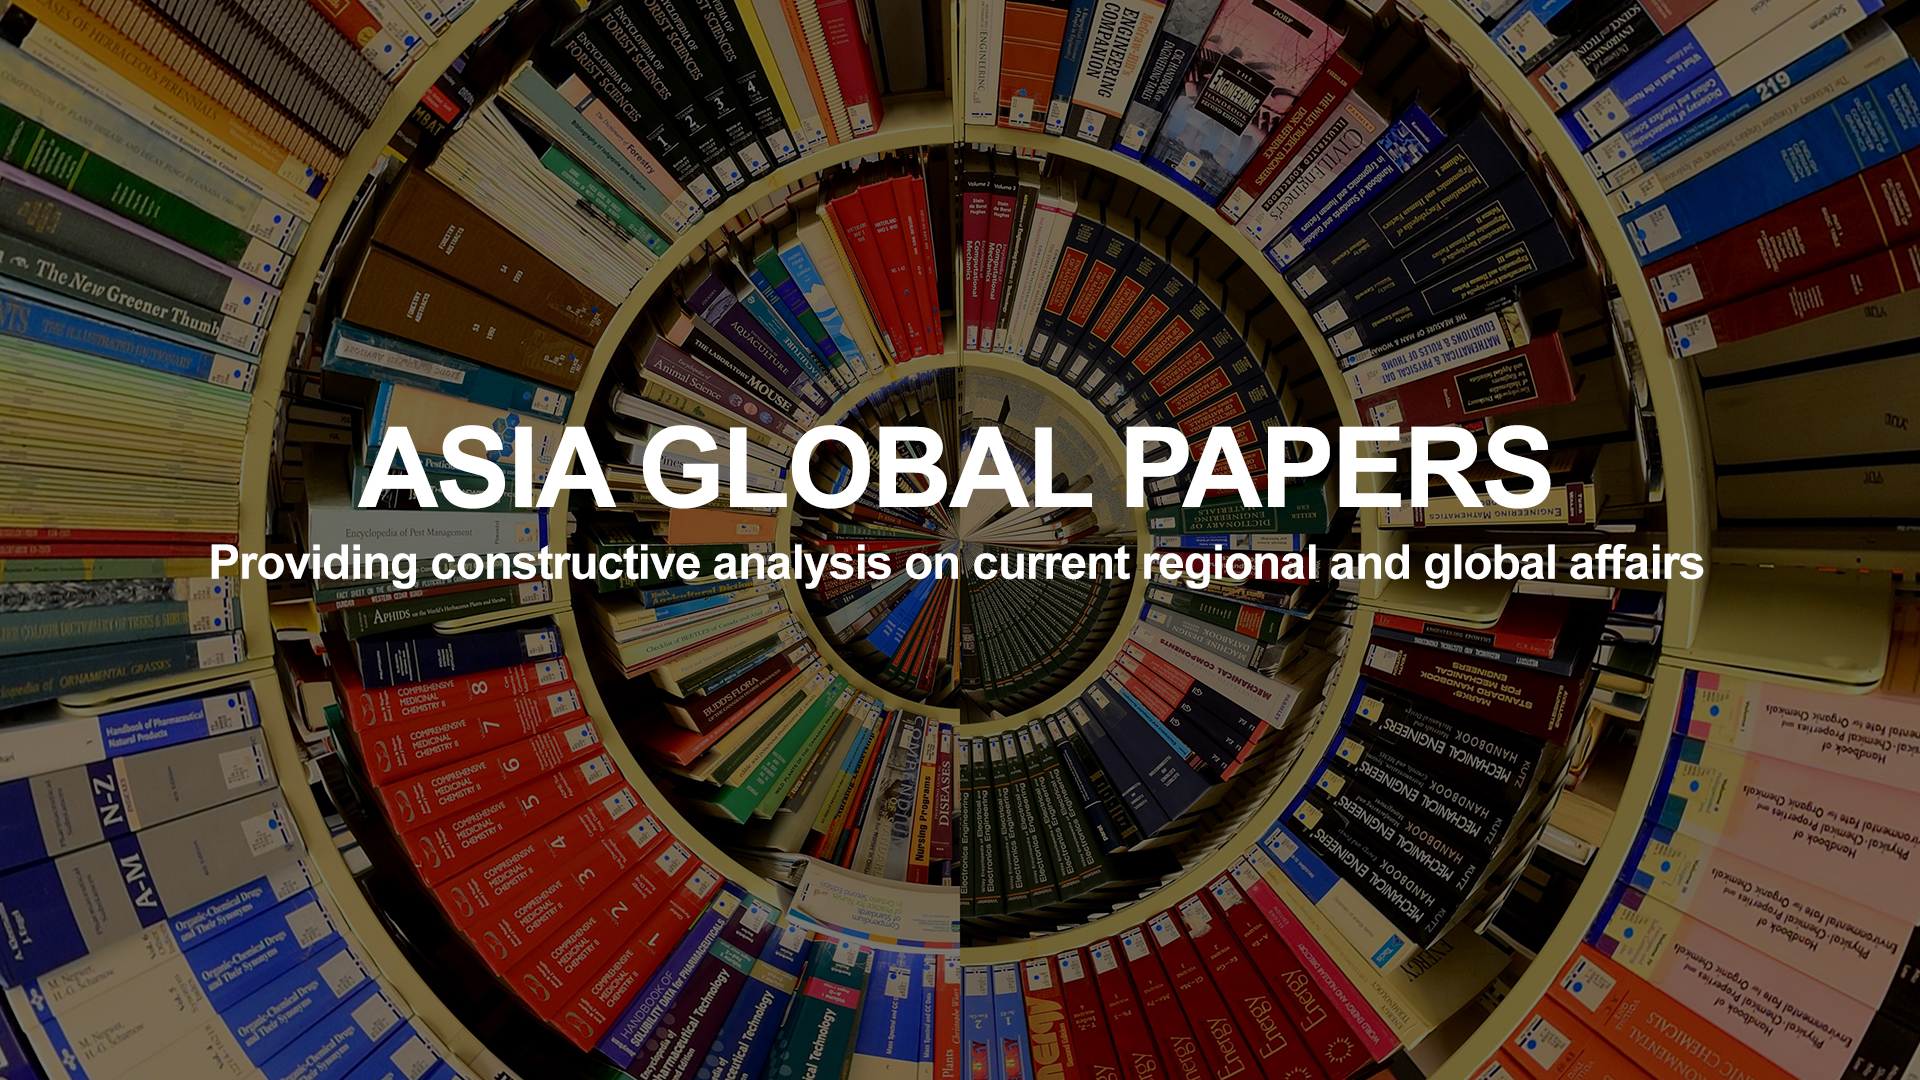 AsiaGlobal Papers